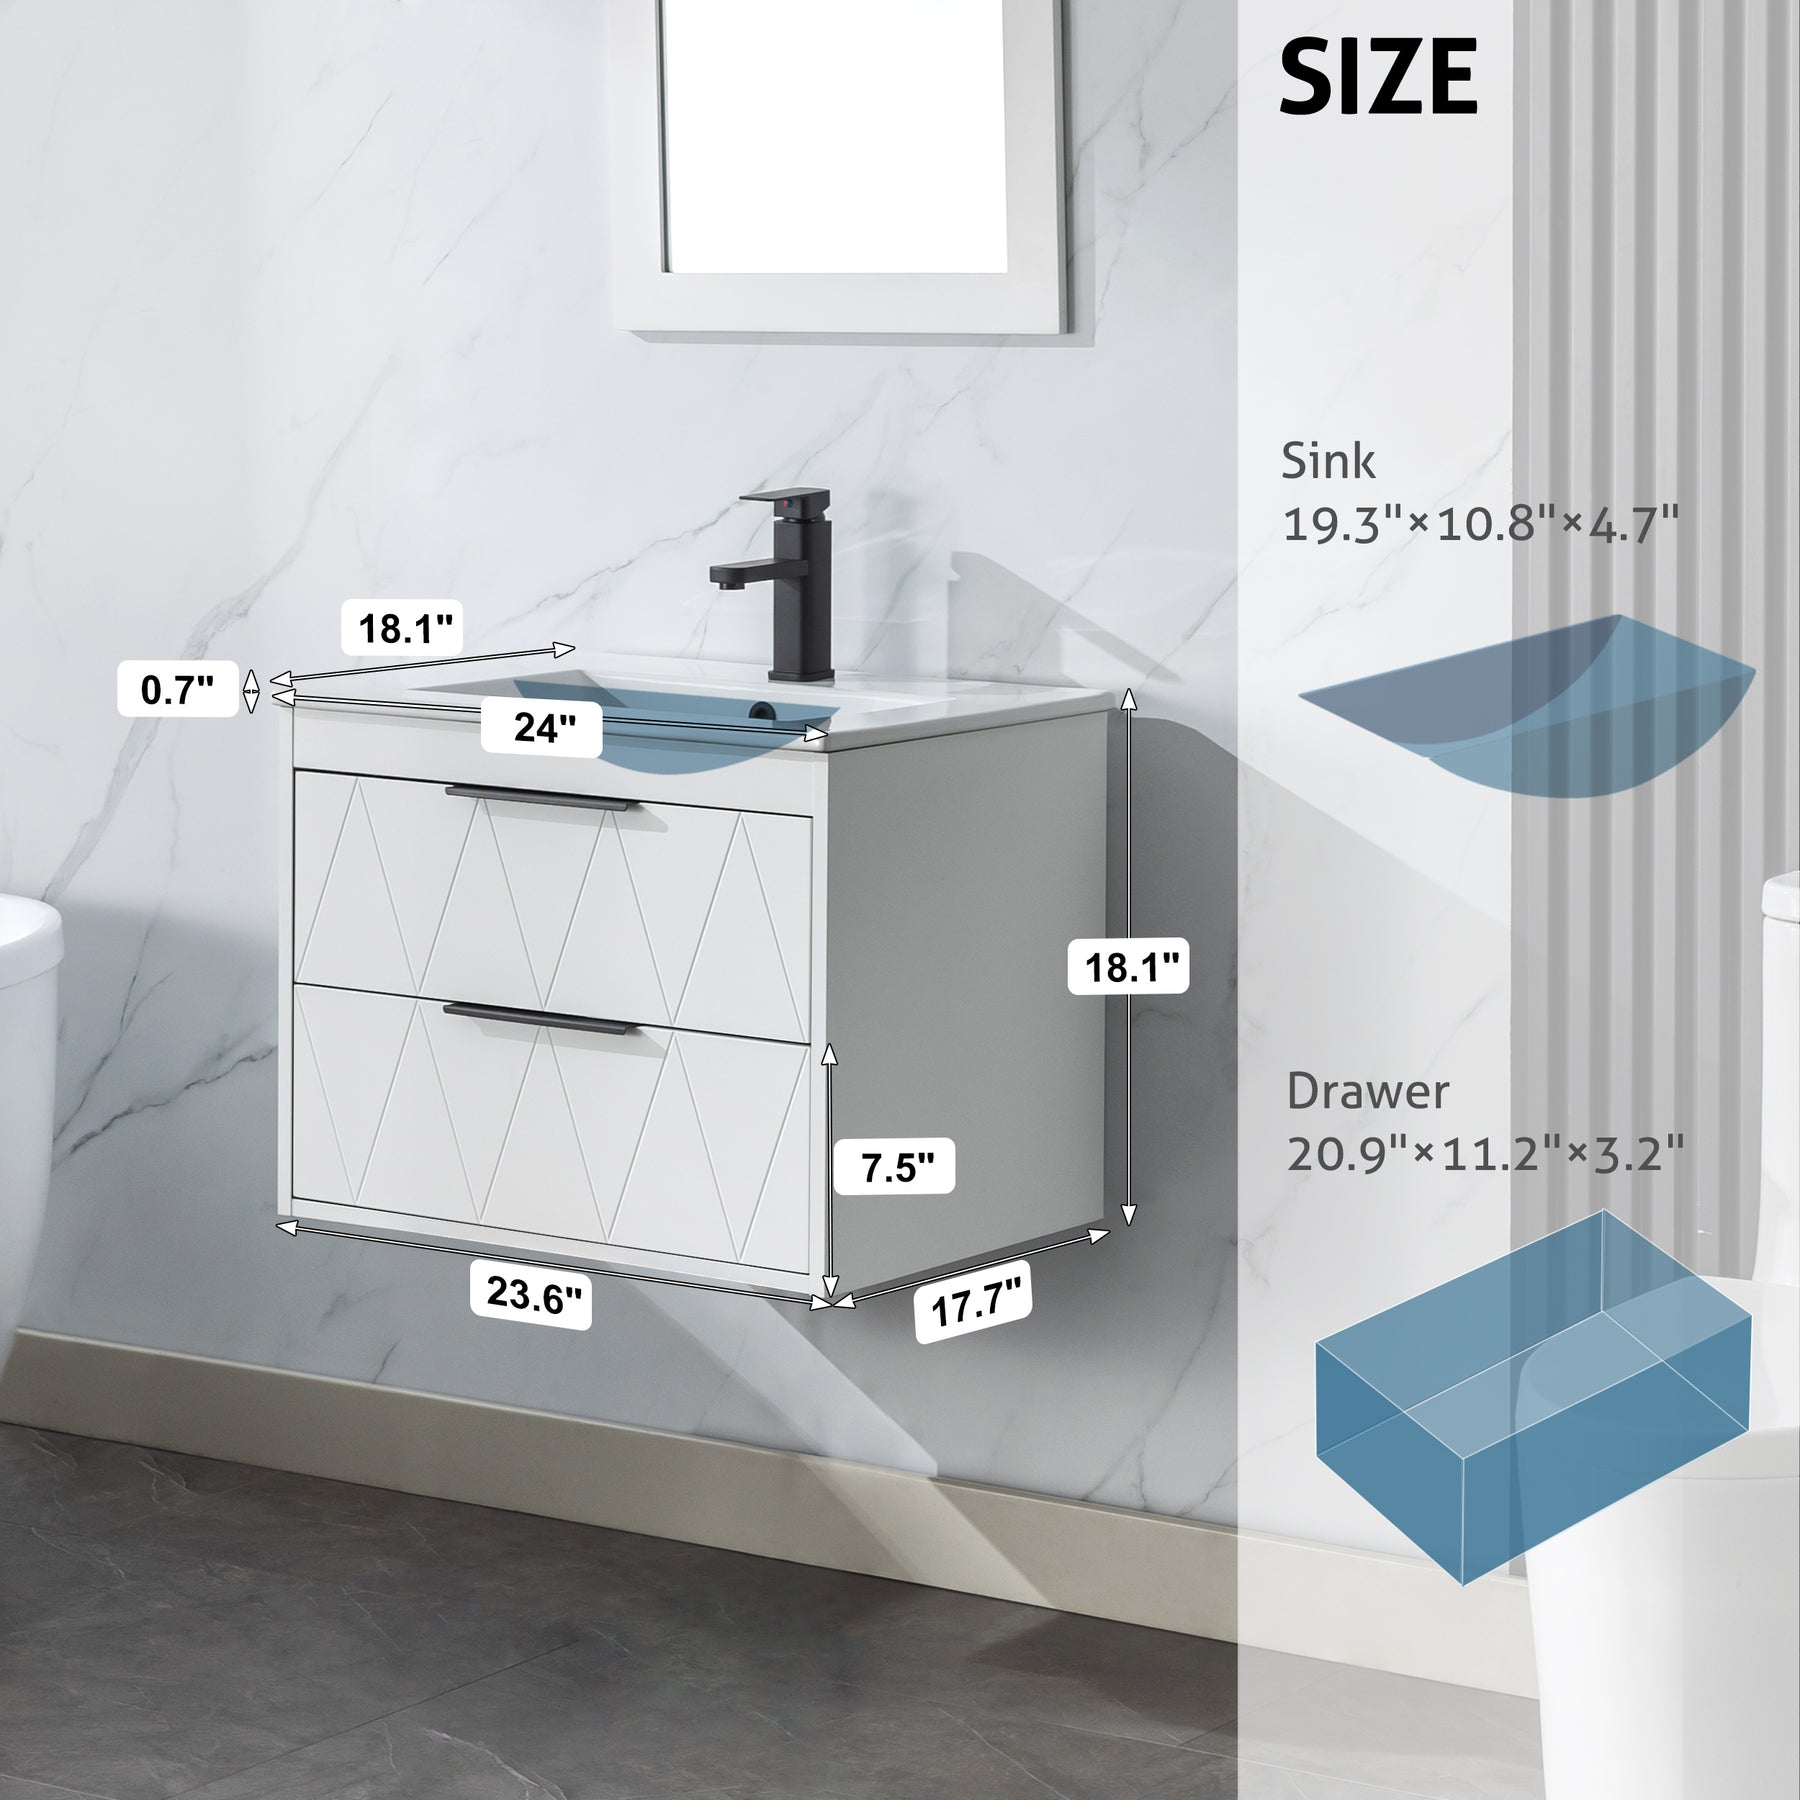 Eclife 24" Morden Bathroom Vanity Cabinet with Sink Combo, Wall Mounted Floating Cabinet - White